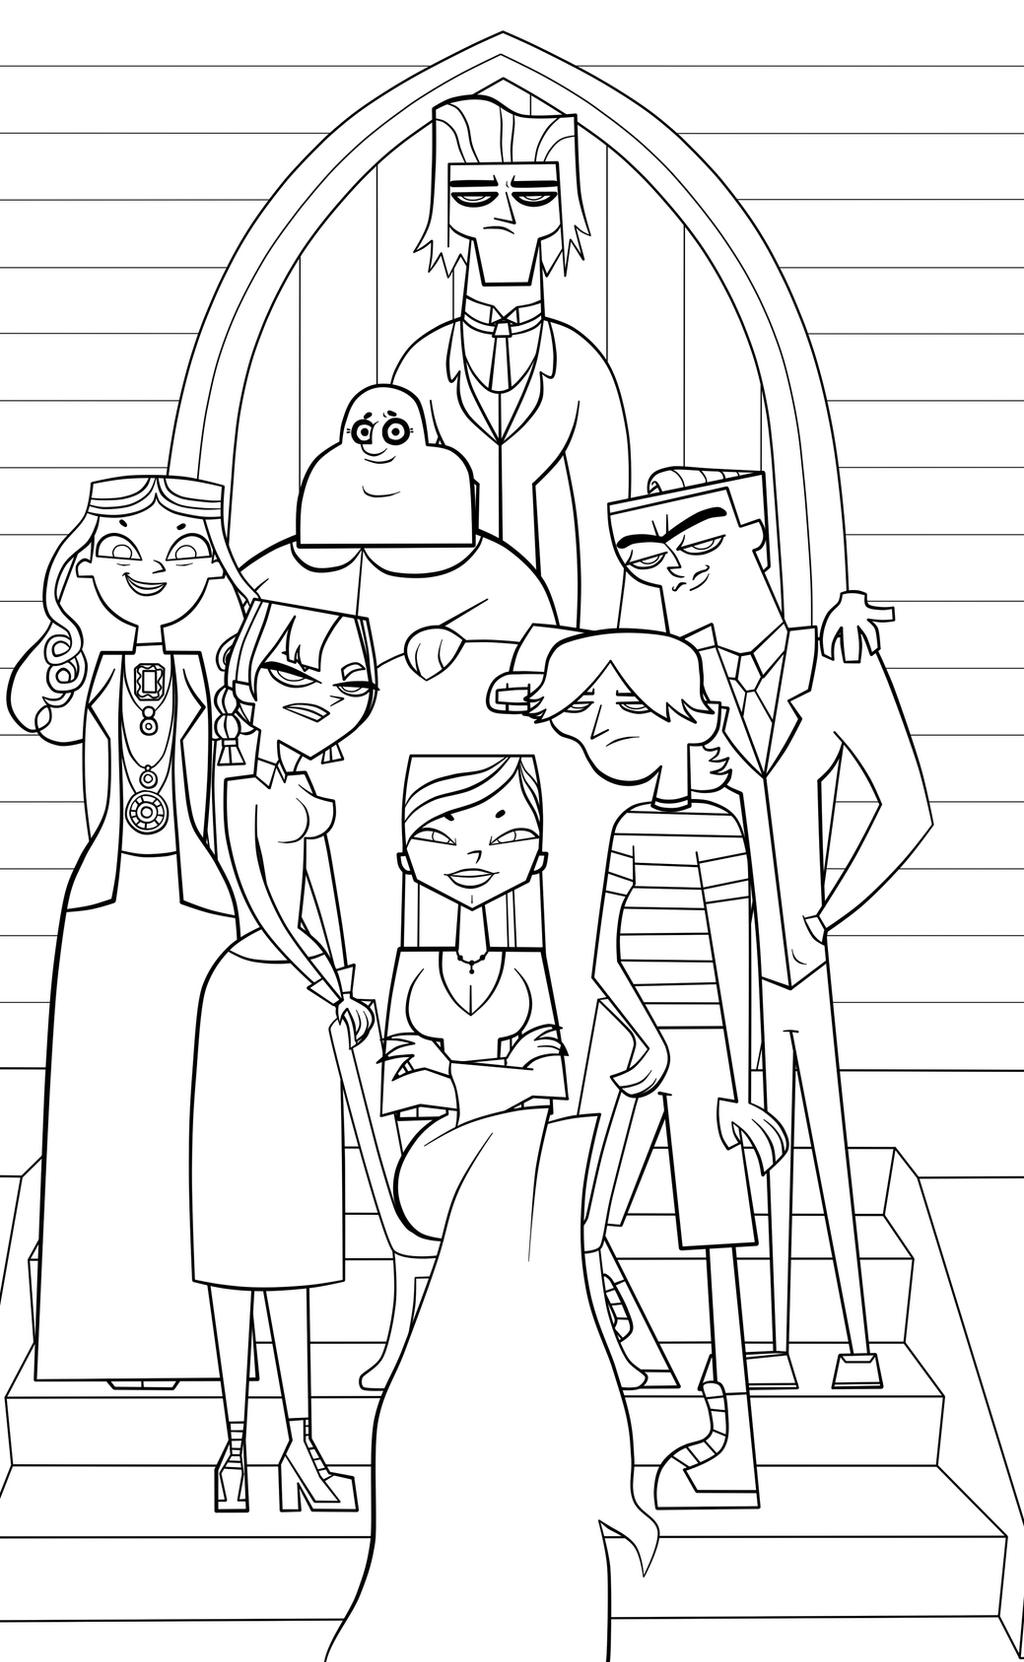 The Addams Family Coloring Pages: A Timeless Icon of Gothic Culture - Printable The Addams Family Coloring Pages